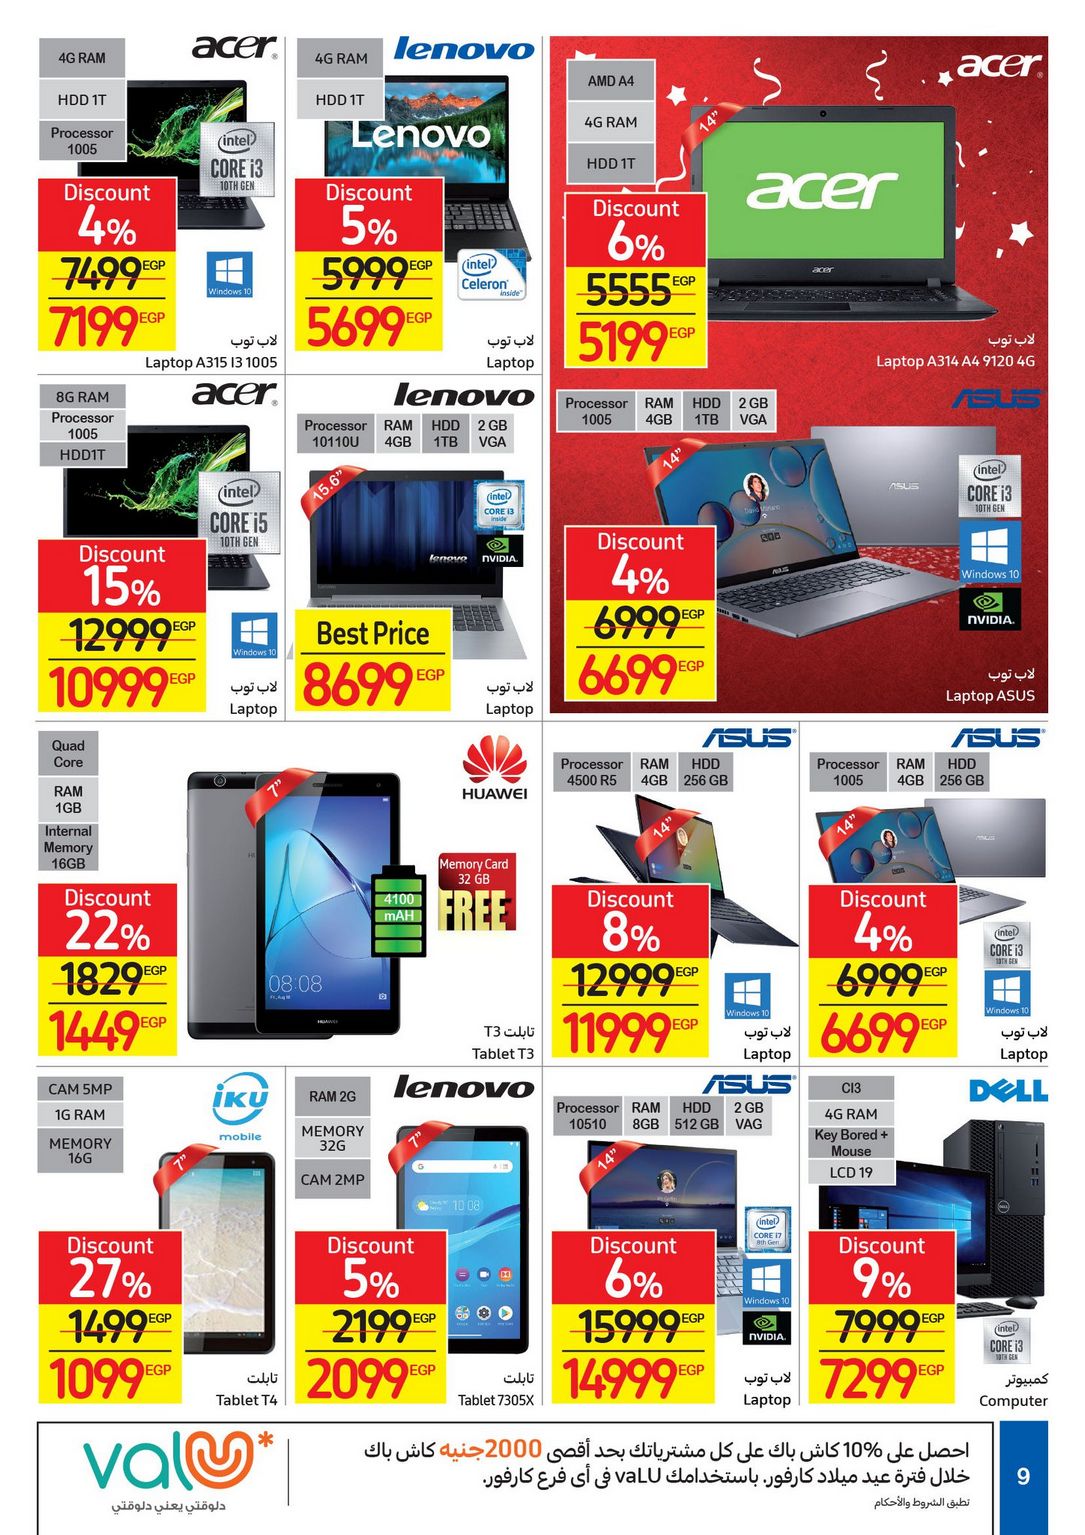 Carrefour Anniversary Offers till 18/2/2021 | Carrefour Egypt 11